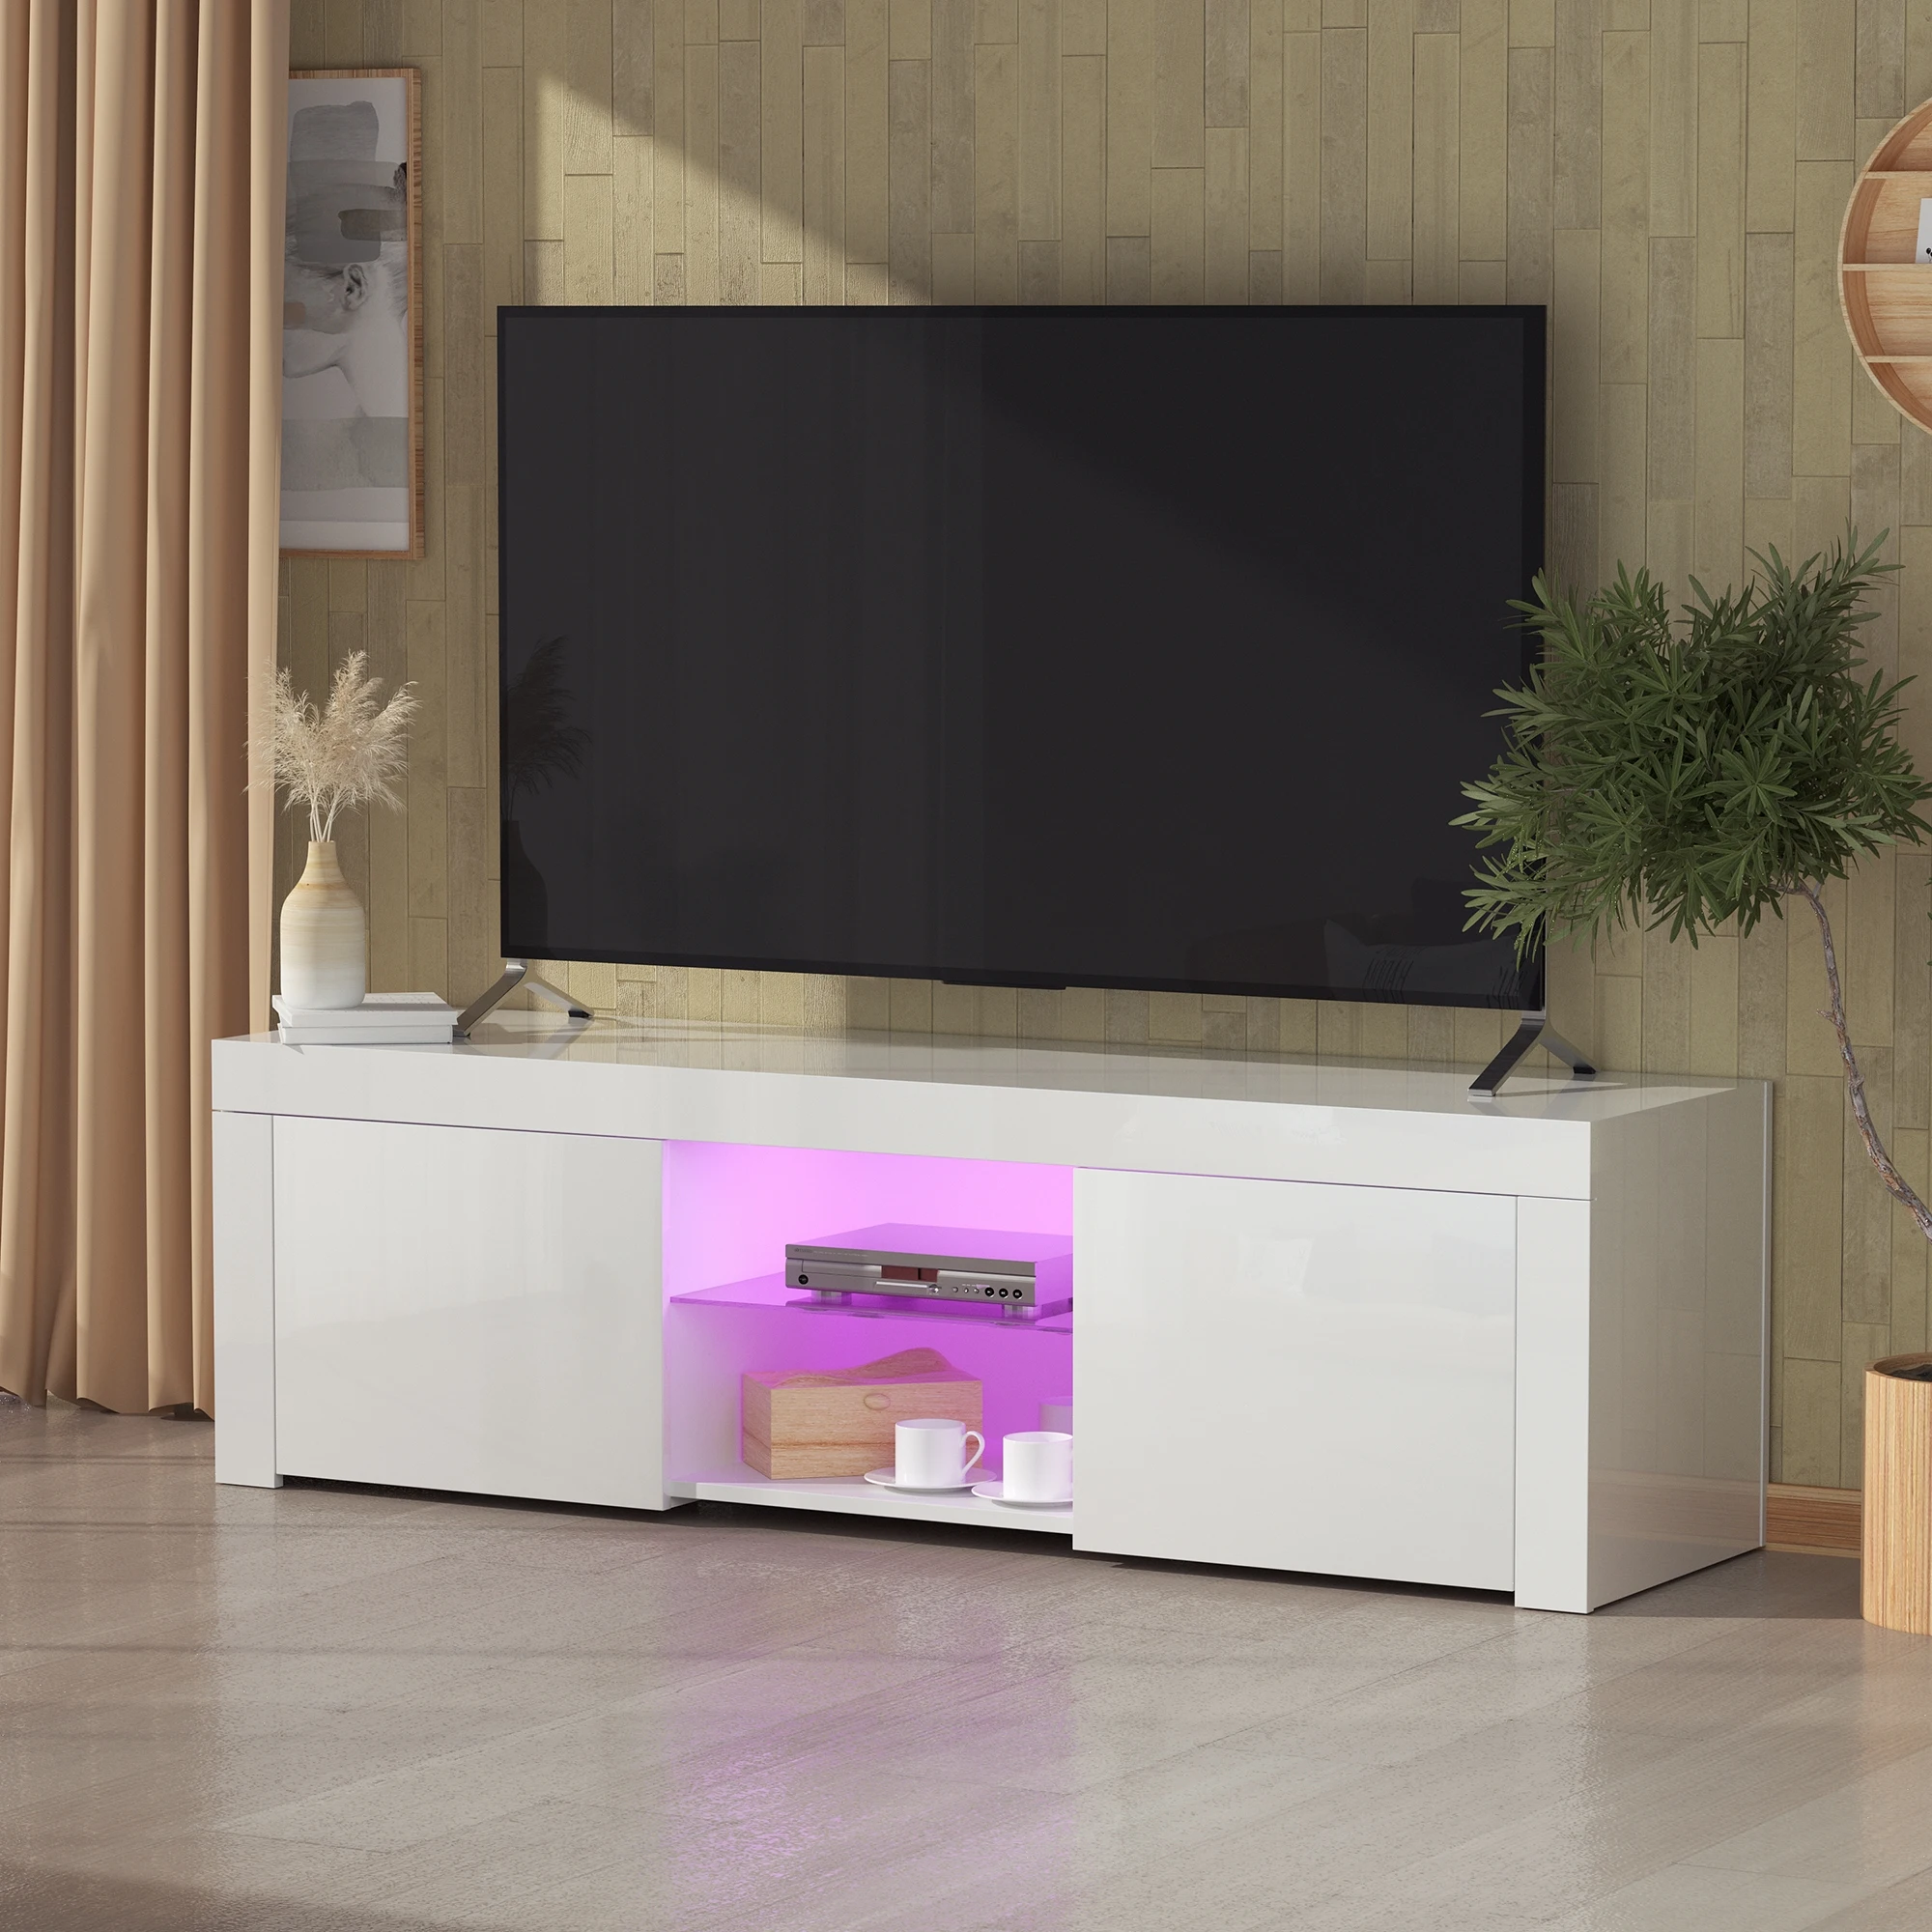 

Morden TV Stand with LED Lights High Glossy Front TV Cabinet Can be Assembled in Lounge Room Living Room Bedroom White/Black